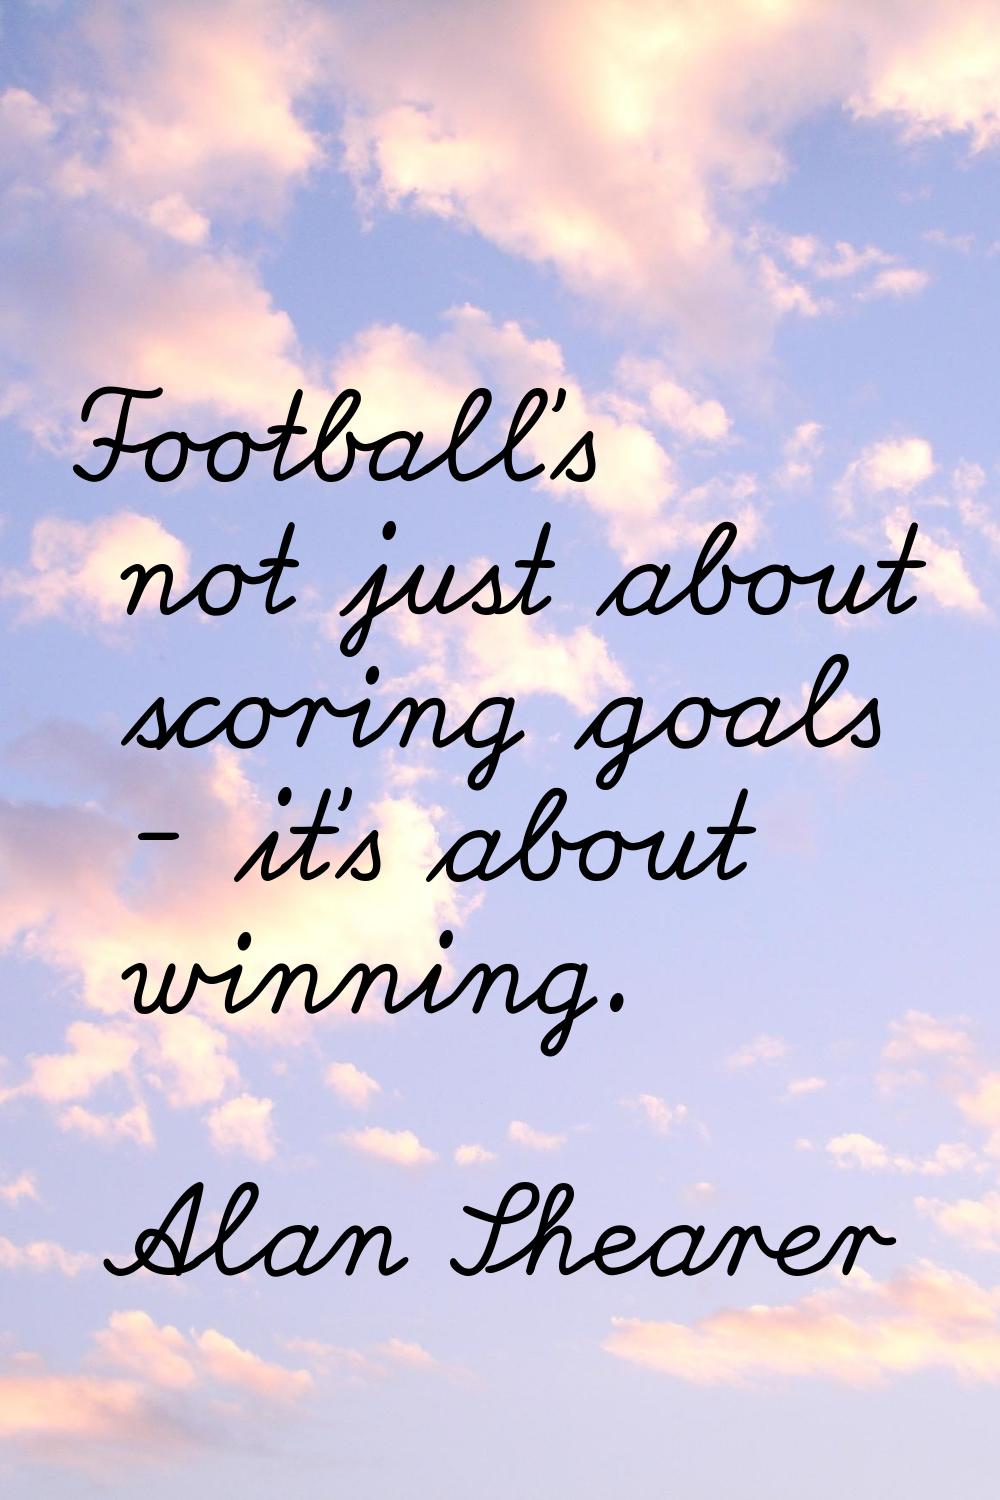 Football's not just about scoring goals - it's about winning.